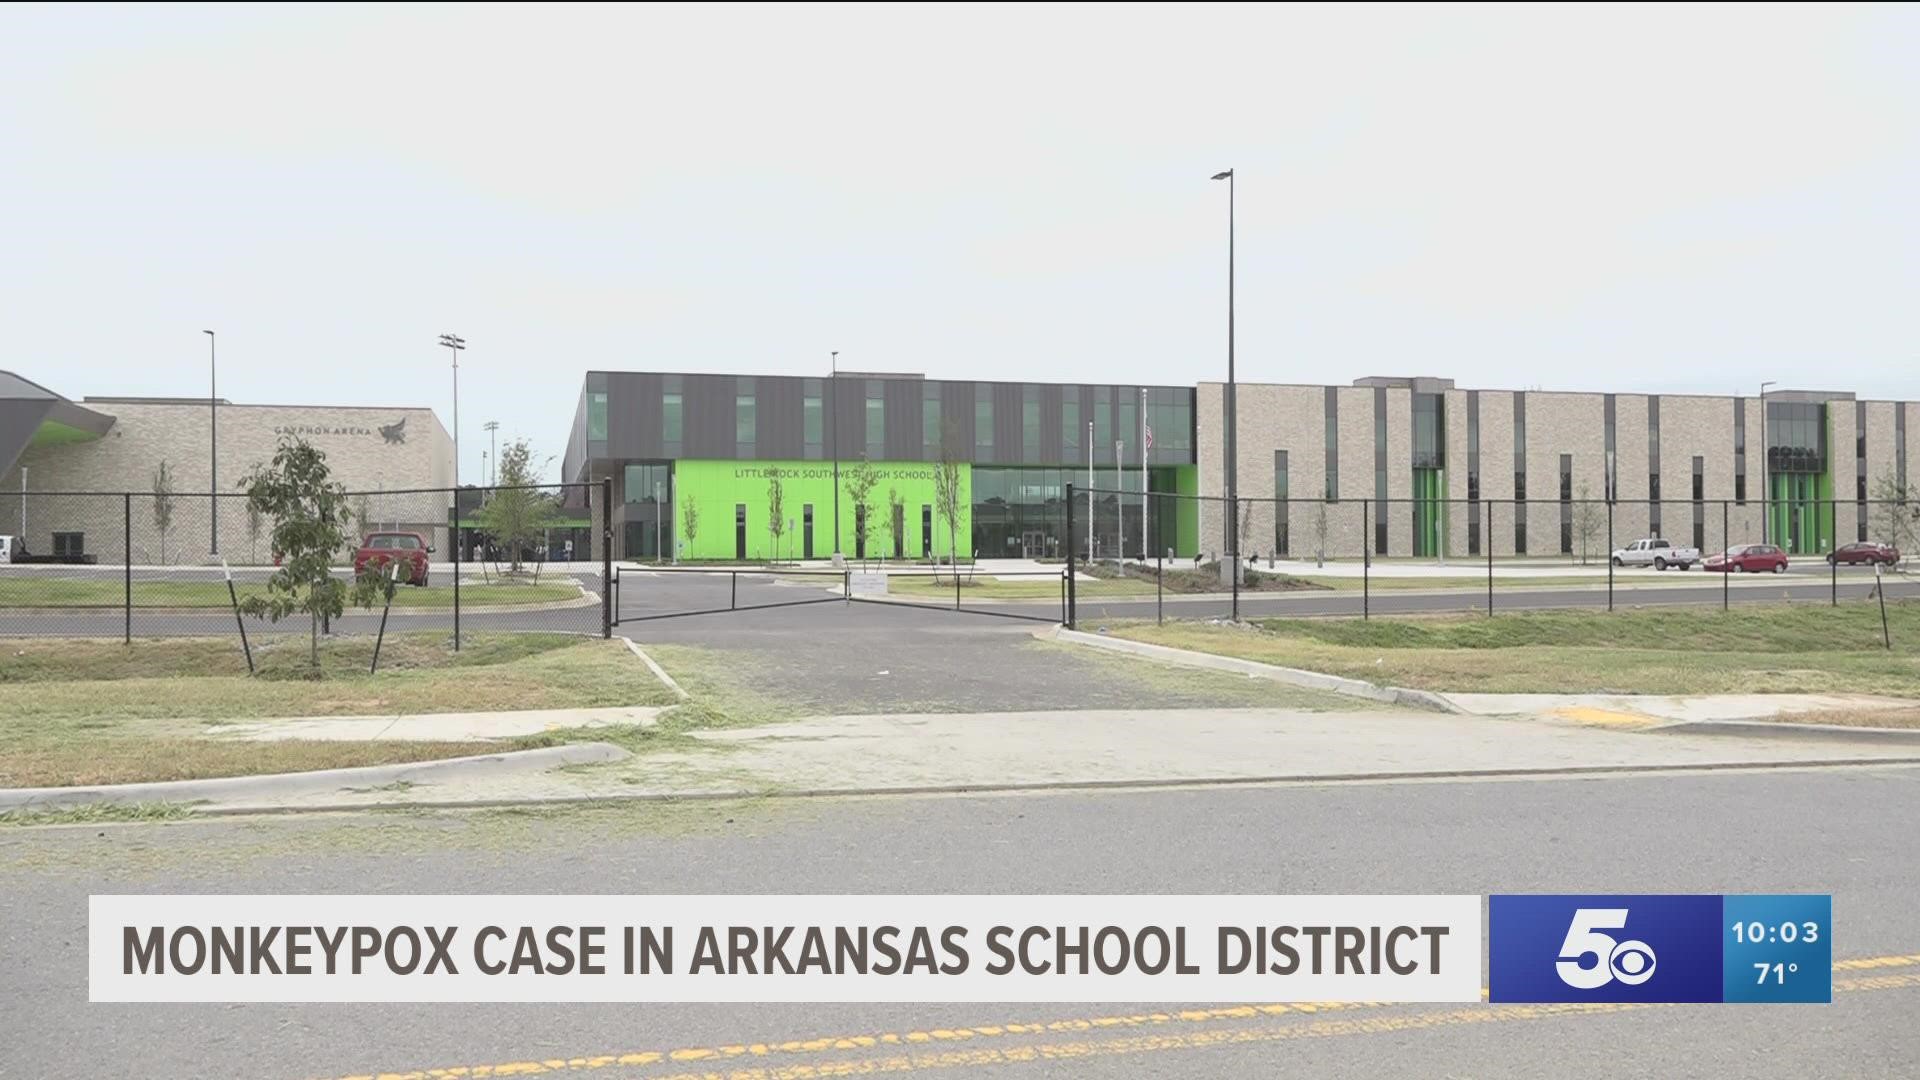 Little Rock School District is working with the Arkansas Department of Health after a positive monkeypox case was reported at one of their schools.